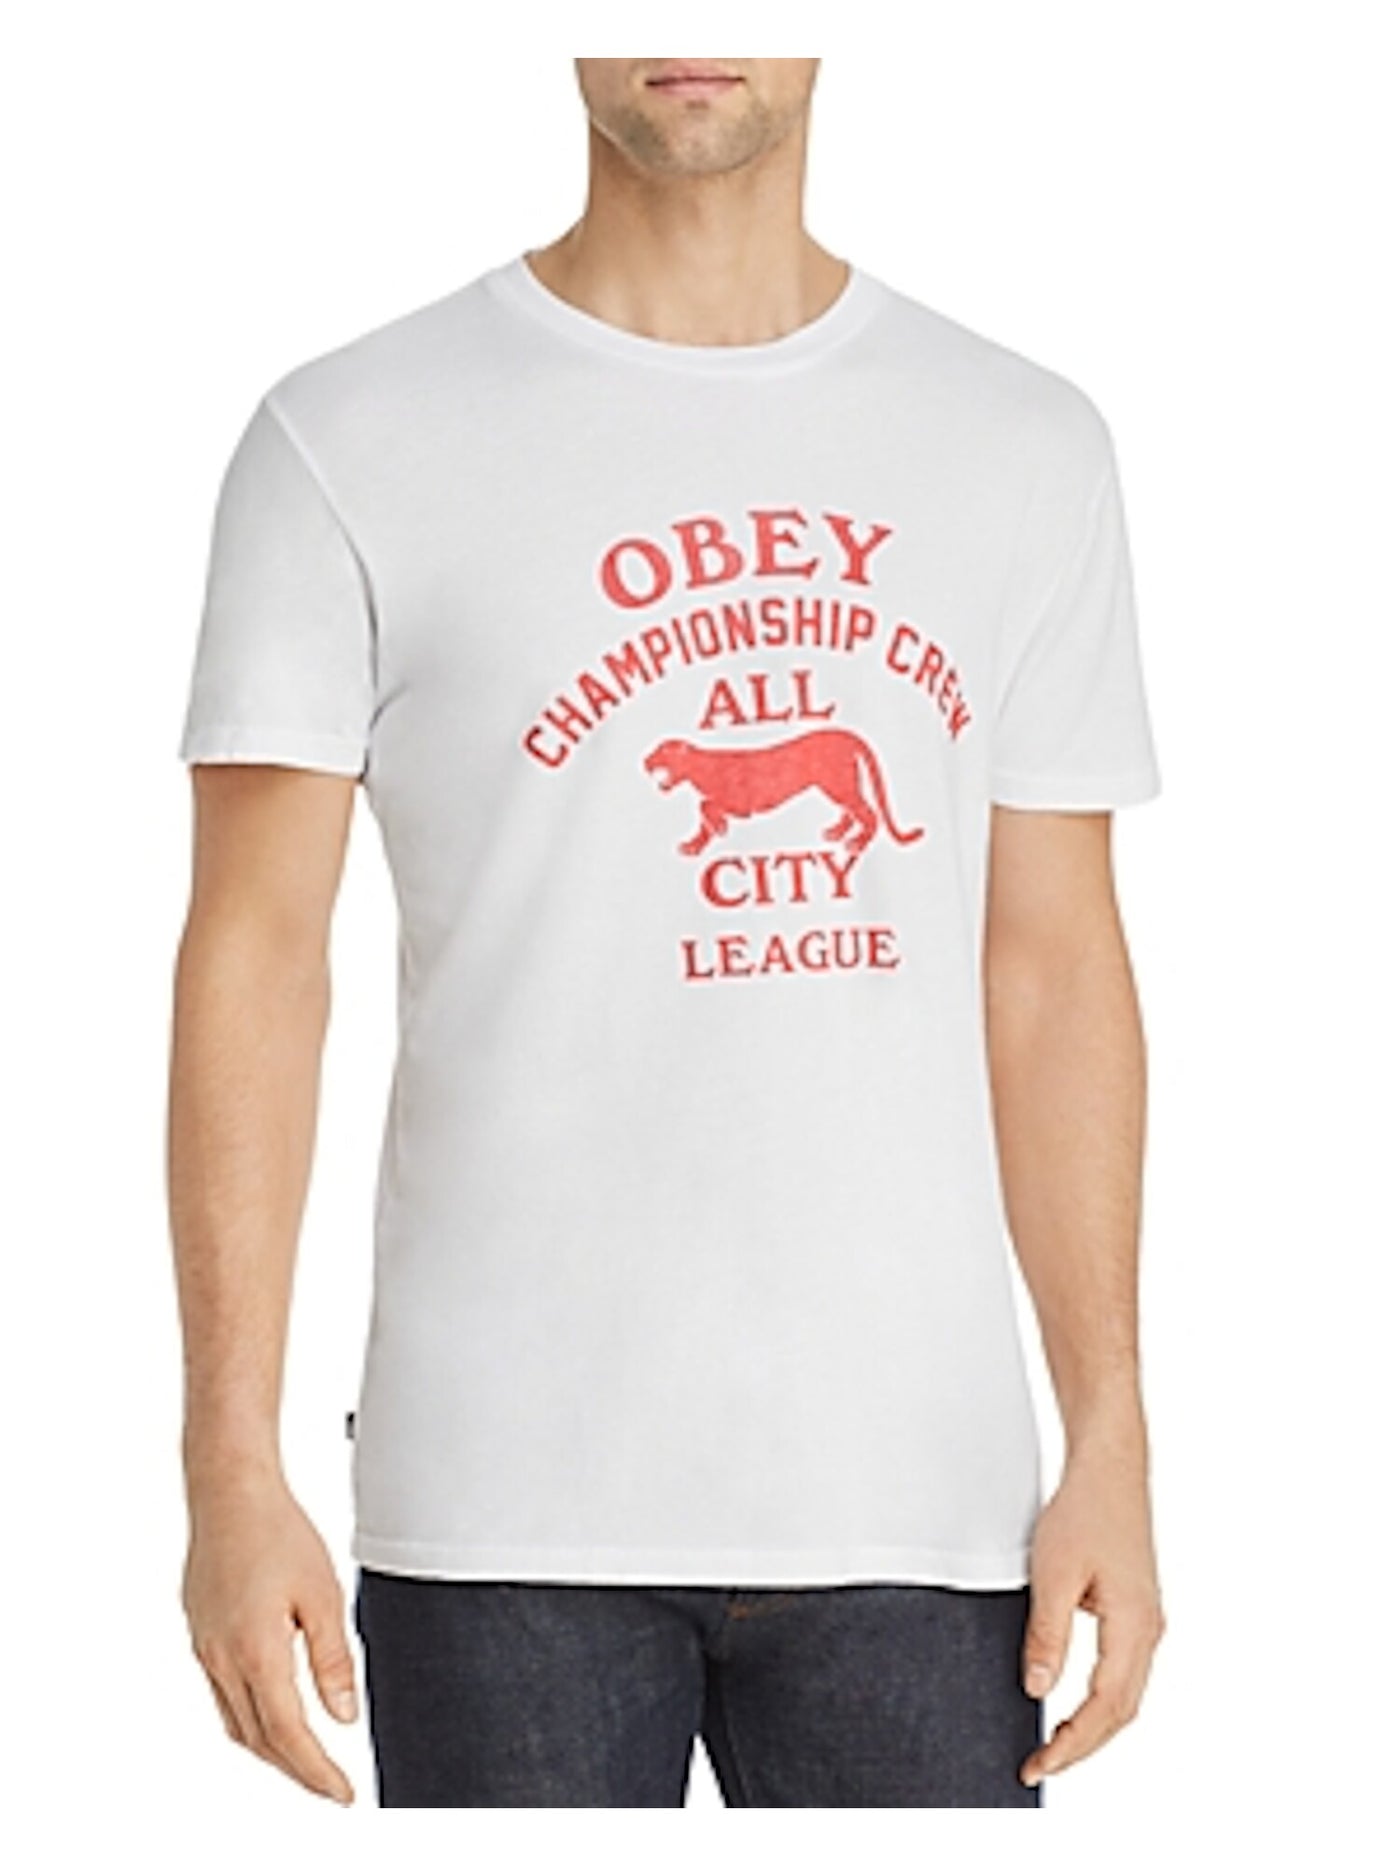 OBEY Mens White Graphic Short Sleeve T-Shirt XXL